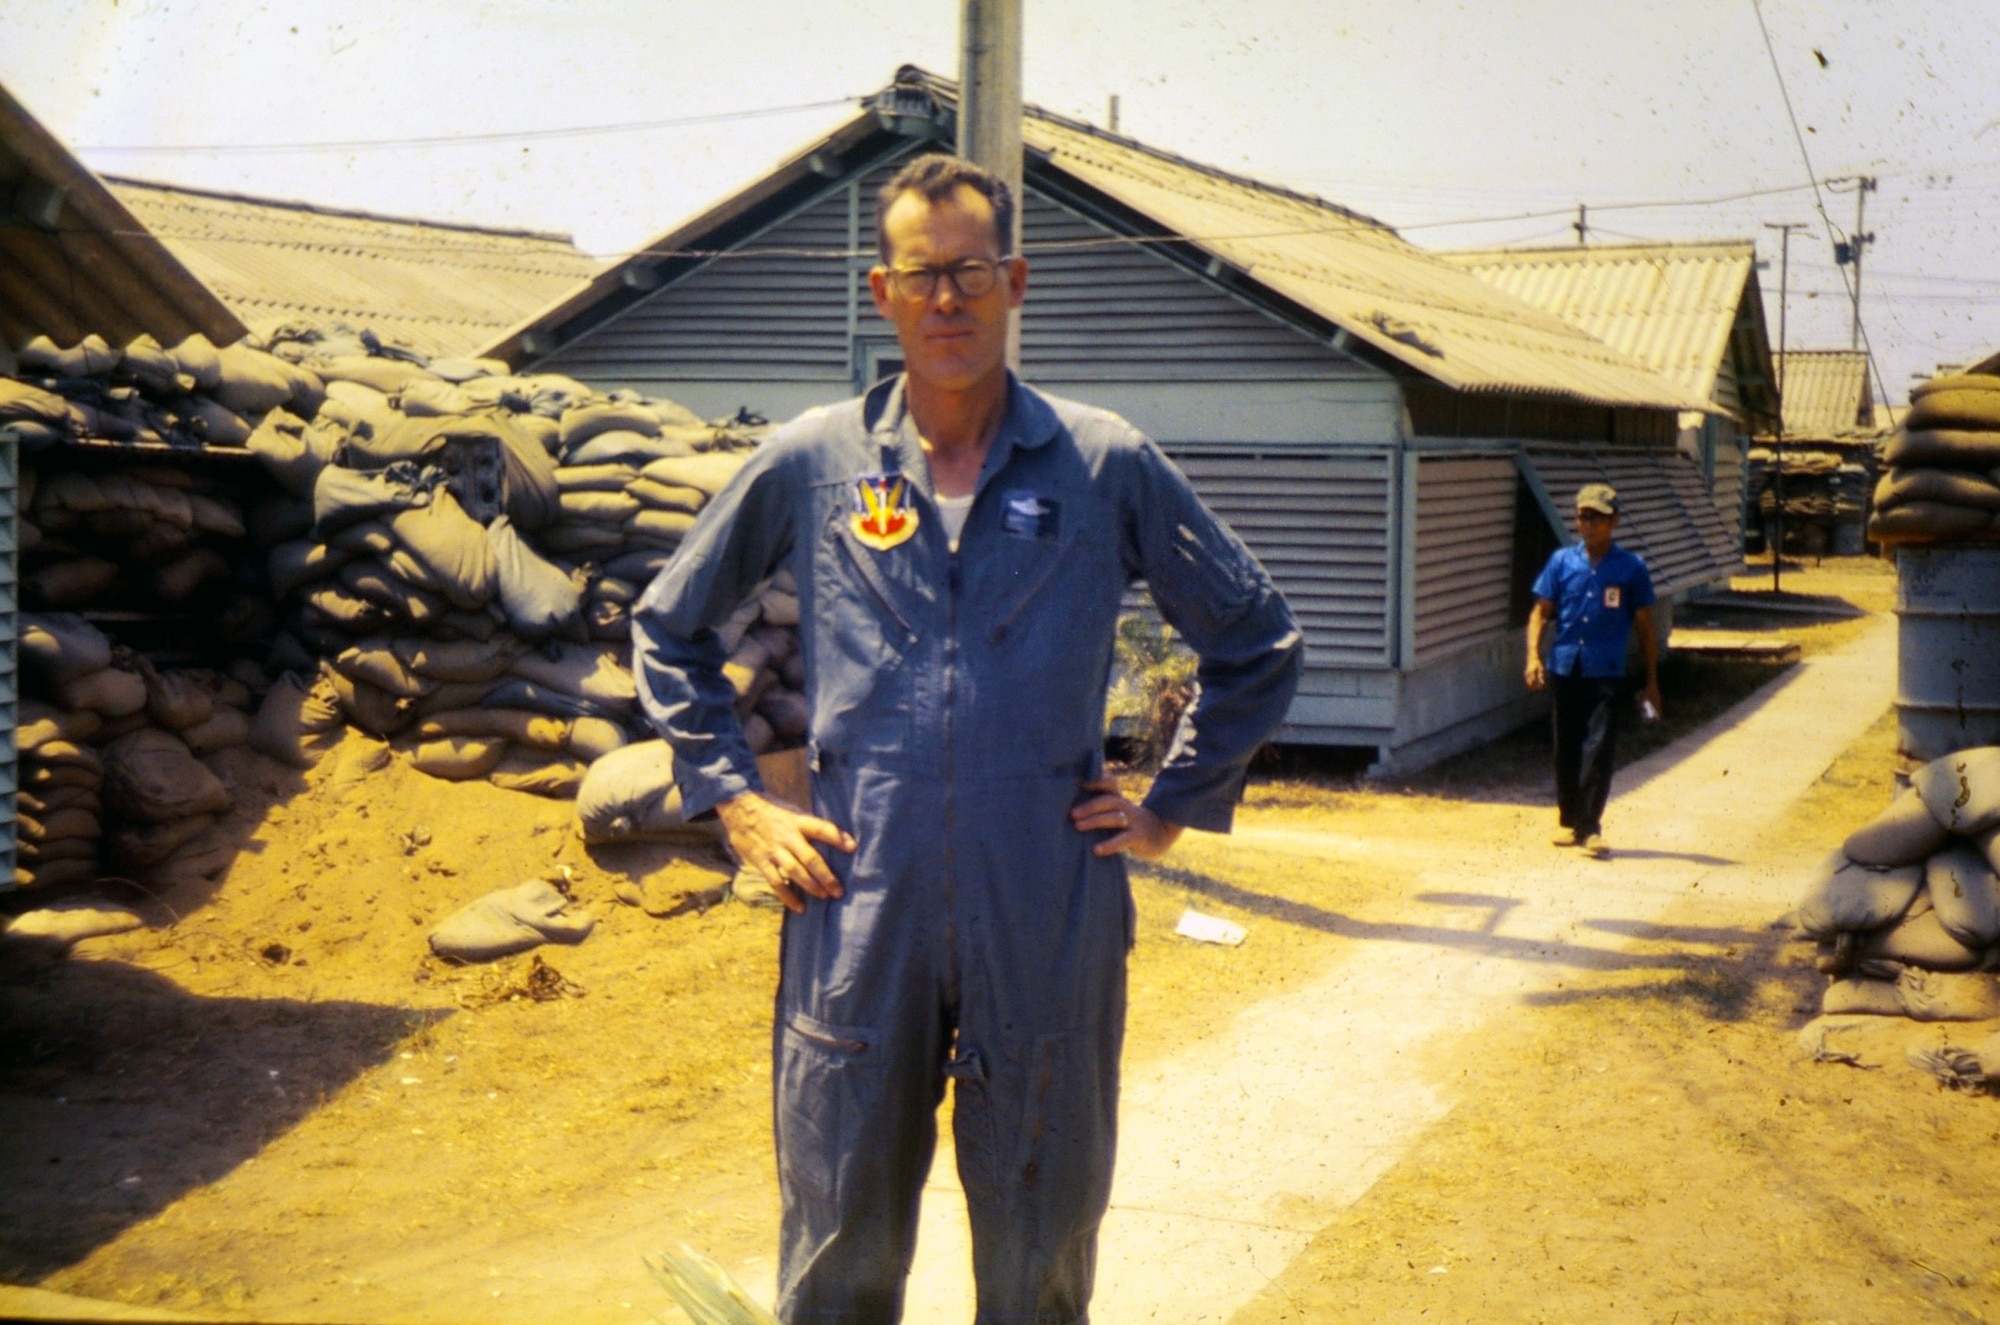 Maj. Robert F. Woods had this photo taken of him while he was stationed at Da Nang Air Base, Vietnam, in 1968.  On June 26, 1968, Major Woods disappeared in the Quang Binh Province in Vietnam after the 02-A Skymaster he was flying crashed in a remote mountainous region.  A native of Salt Lake City, Utah, Major Woods was in the military for 20 years when he disappeared. His career began in June 1948 as an enlisted aircrew member on a C-74 Globemaster in the Berlin Airlift.  In 1951 he became an officer and a pilot flying KC-97 Stratotankers in the Korean Conflict.  In Vietnam, he served as a forward air controller in the Skymaster with the 20th Tactical Air Support Squadron at DaNang AB. He earned his first of eight Air Medals in Korea and also earned the Distinguished Flying Cross and Bronze Star for his service in Vietnam.  On April 9, 2008, he was laid to rest at Arlington National Cemetery nearly 40 years after he disappeared.  (Photo courtesy of the Woods family)  